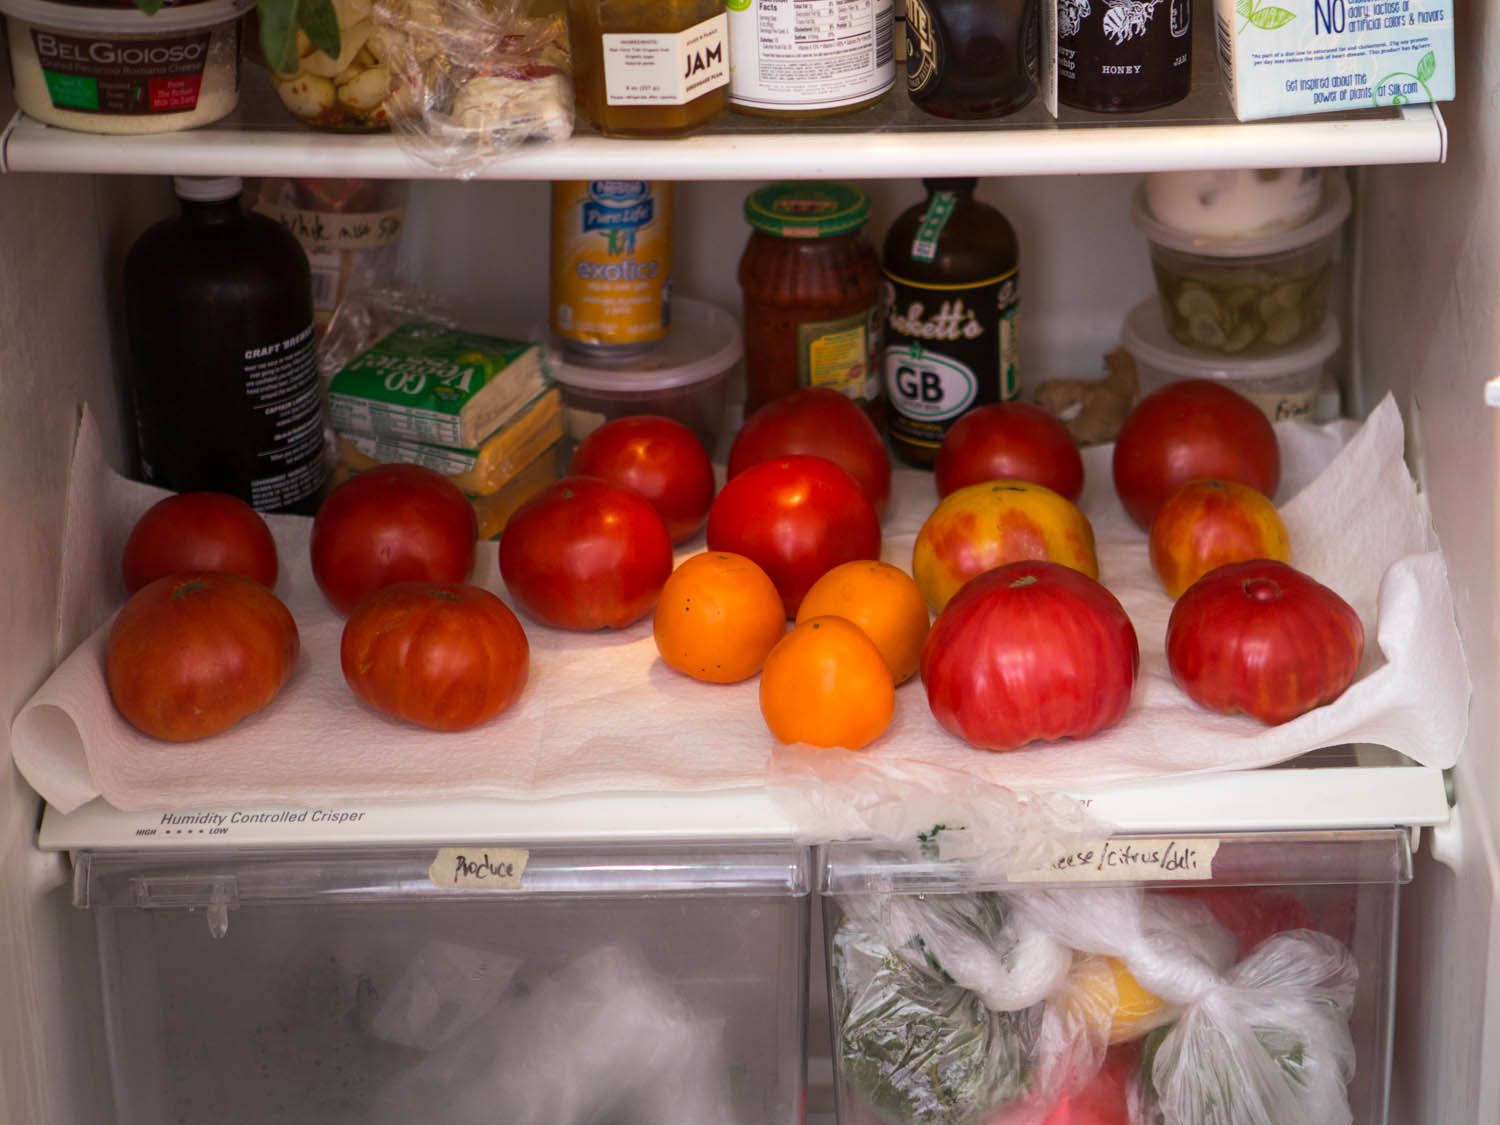 Tomatoes of various sizes, shapes, and colors lined up in a refrigerator. 